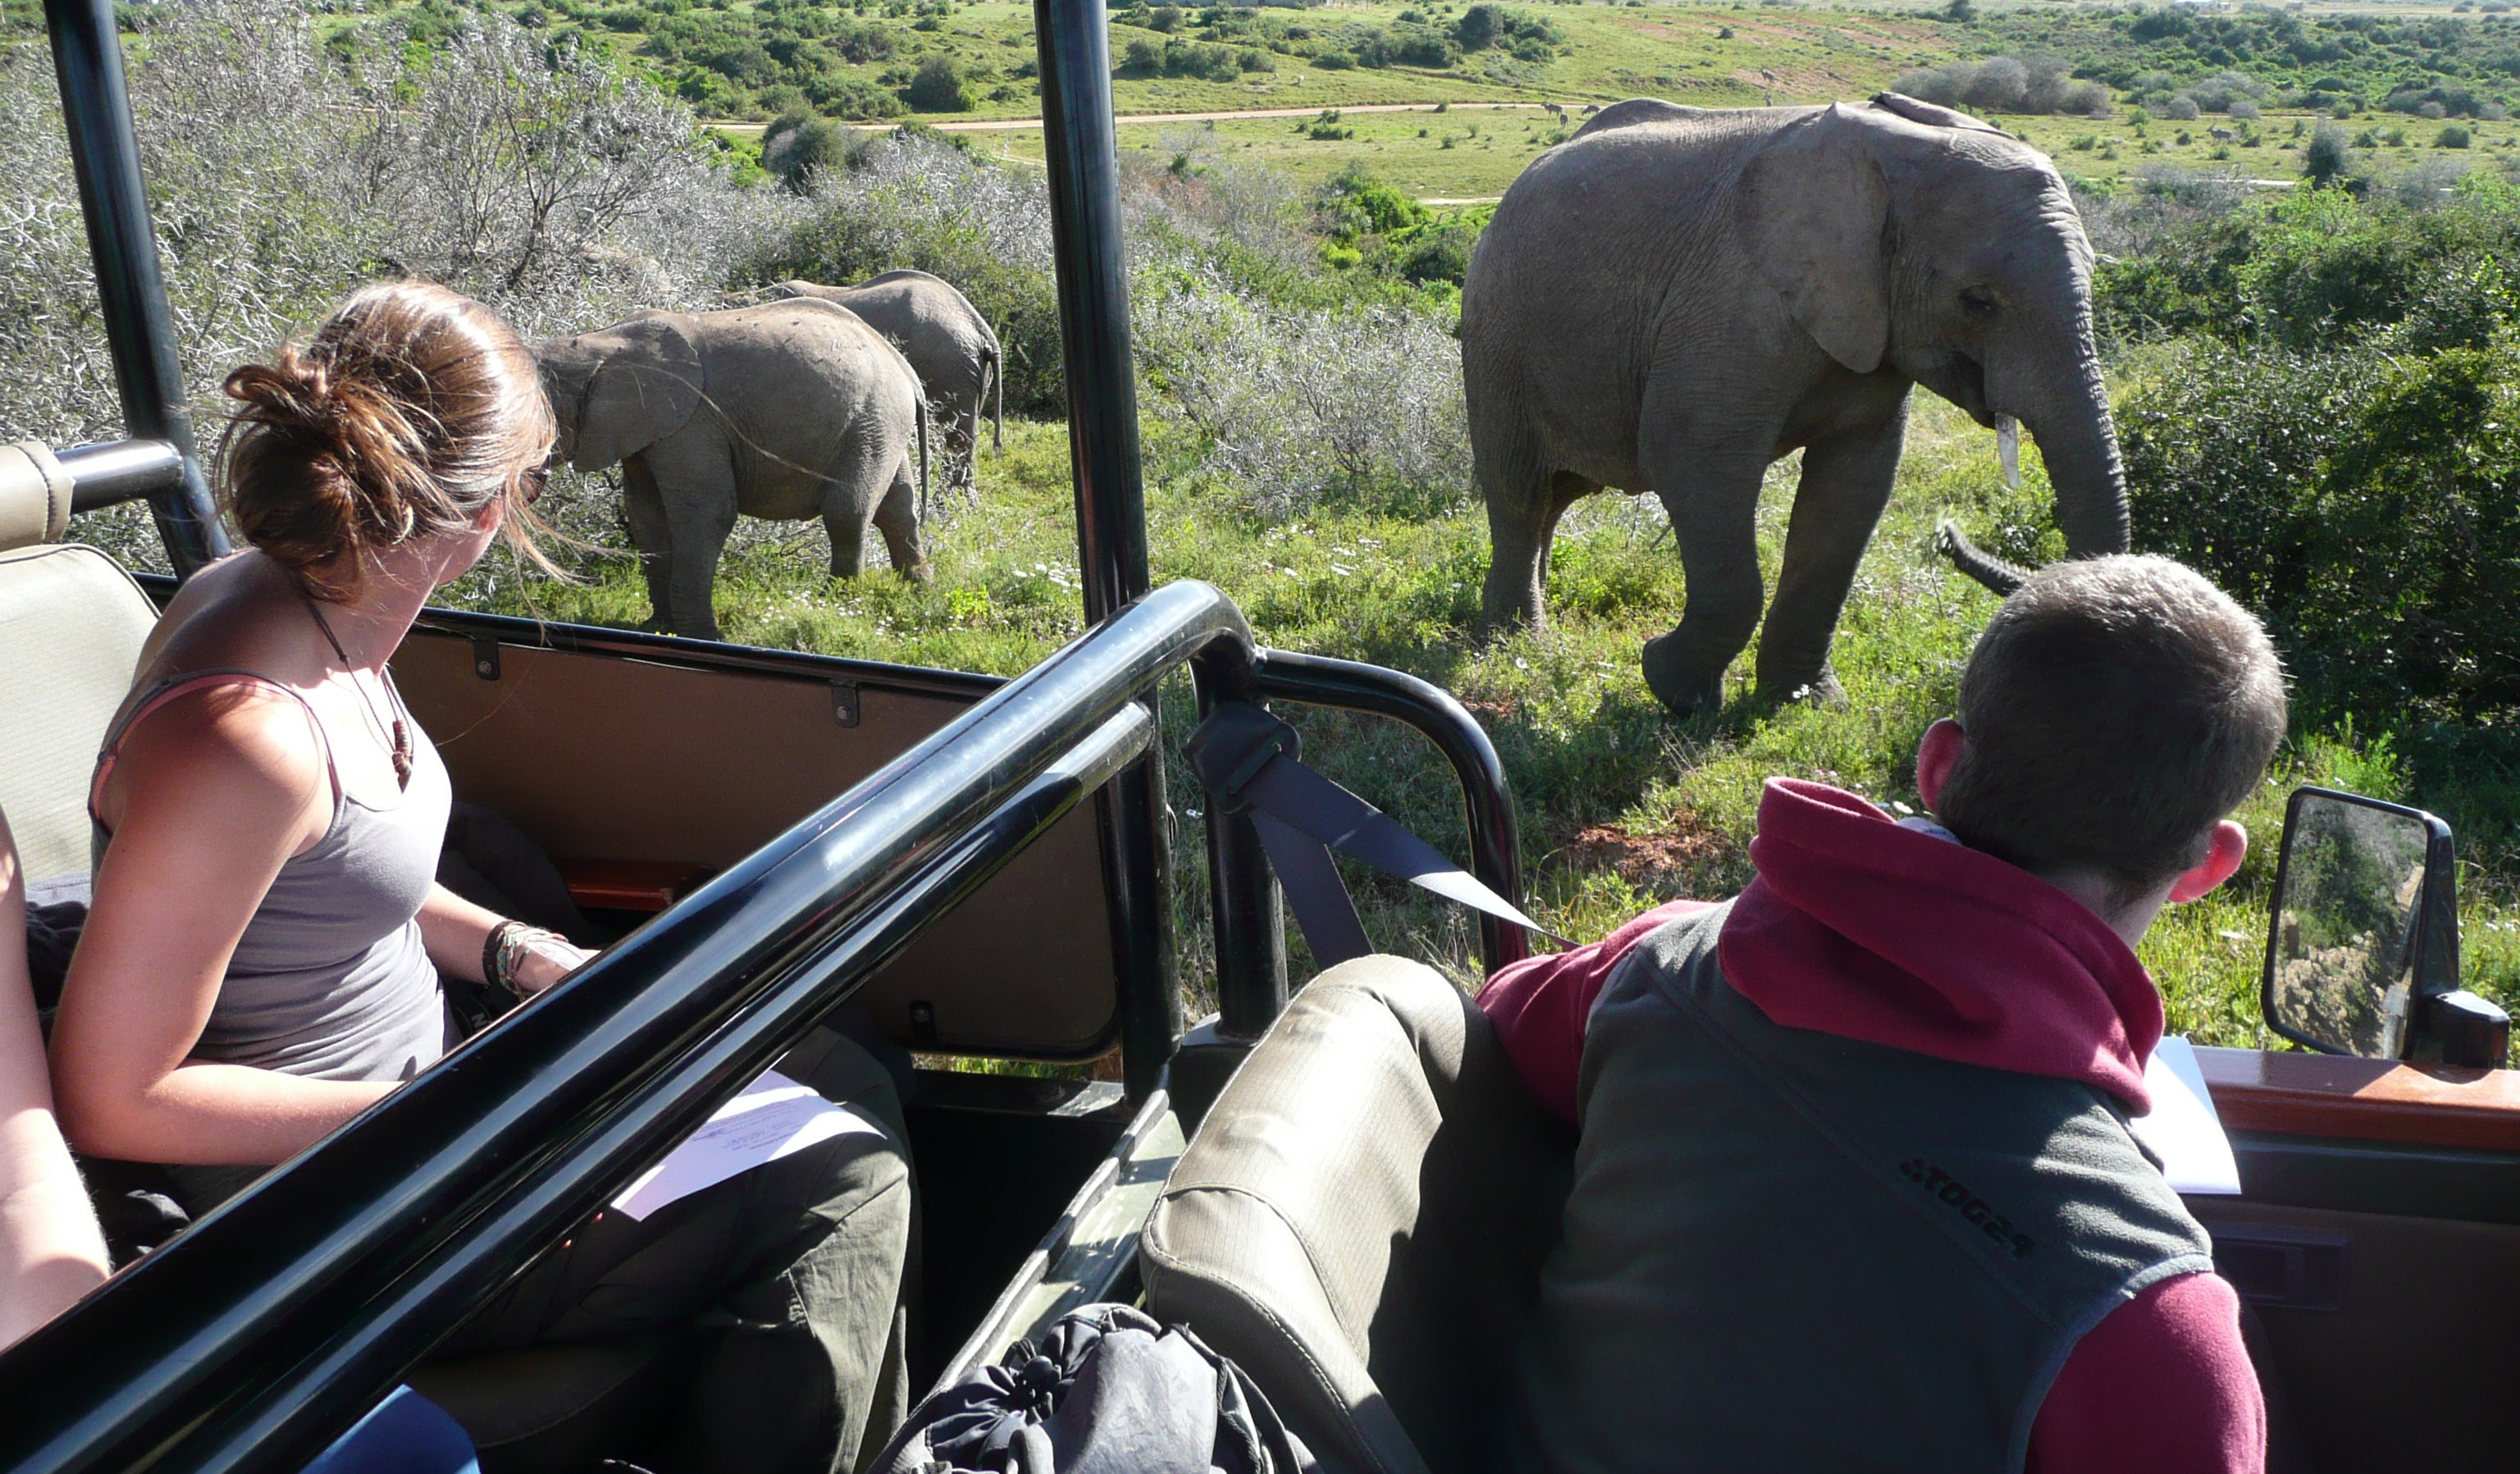 Volunteers watch on as elephants approach their jeep